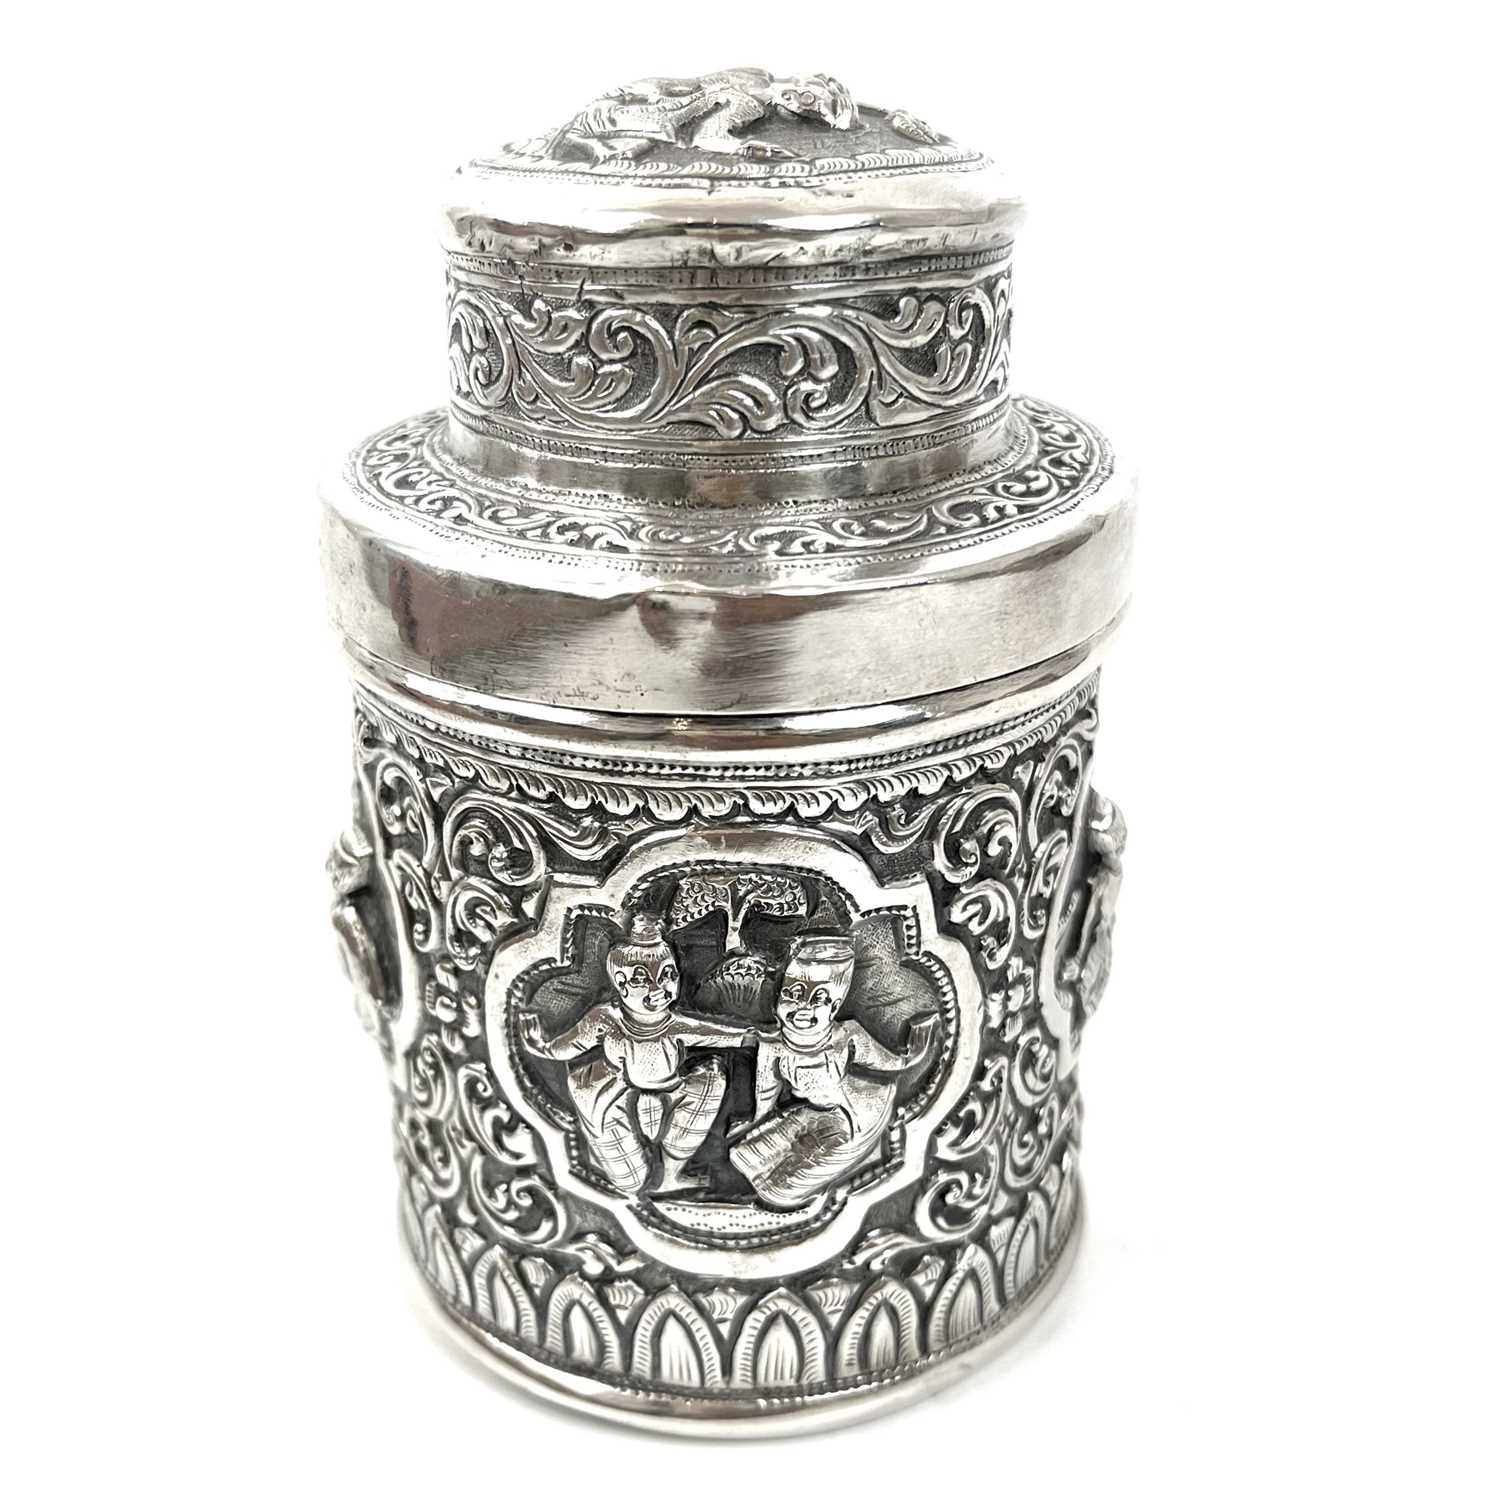 Two Burmese silver lidded cannisters, mid 20th century - Image 2 of 25